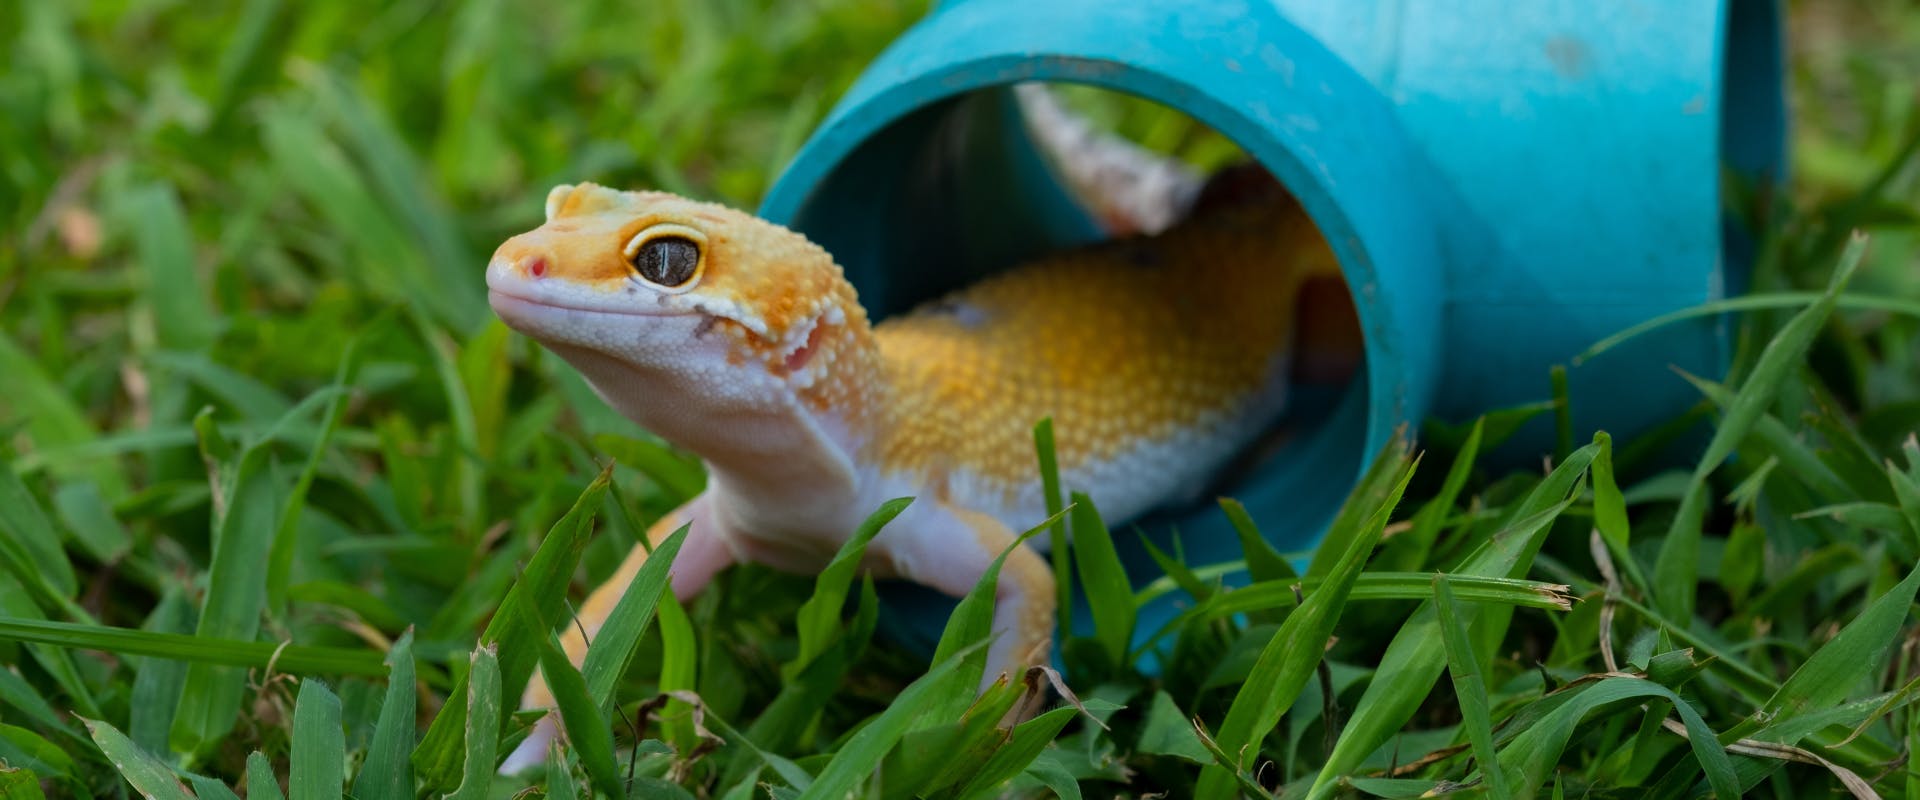 a gecko crawling out of a plastic blue play tube on a patch of grass